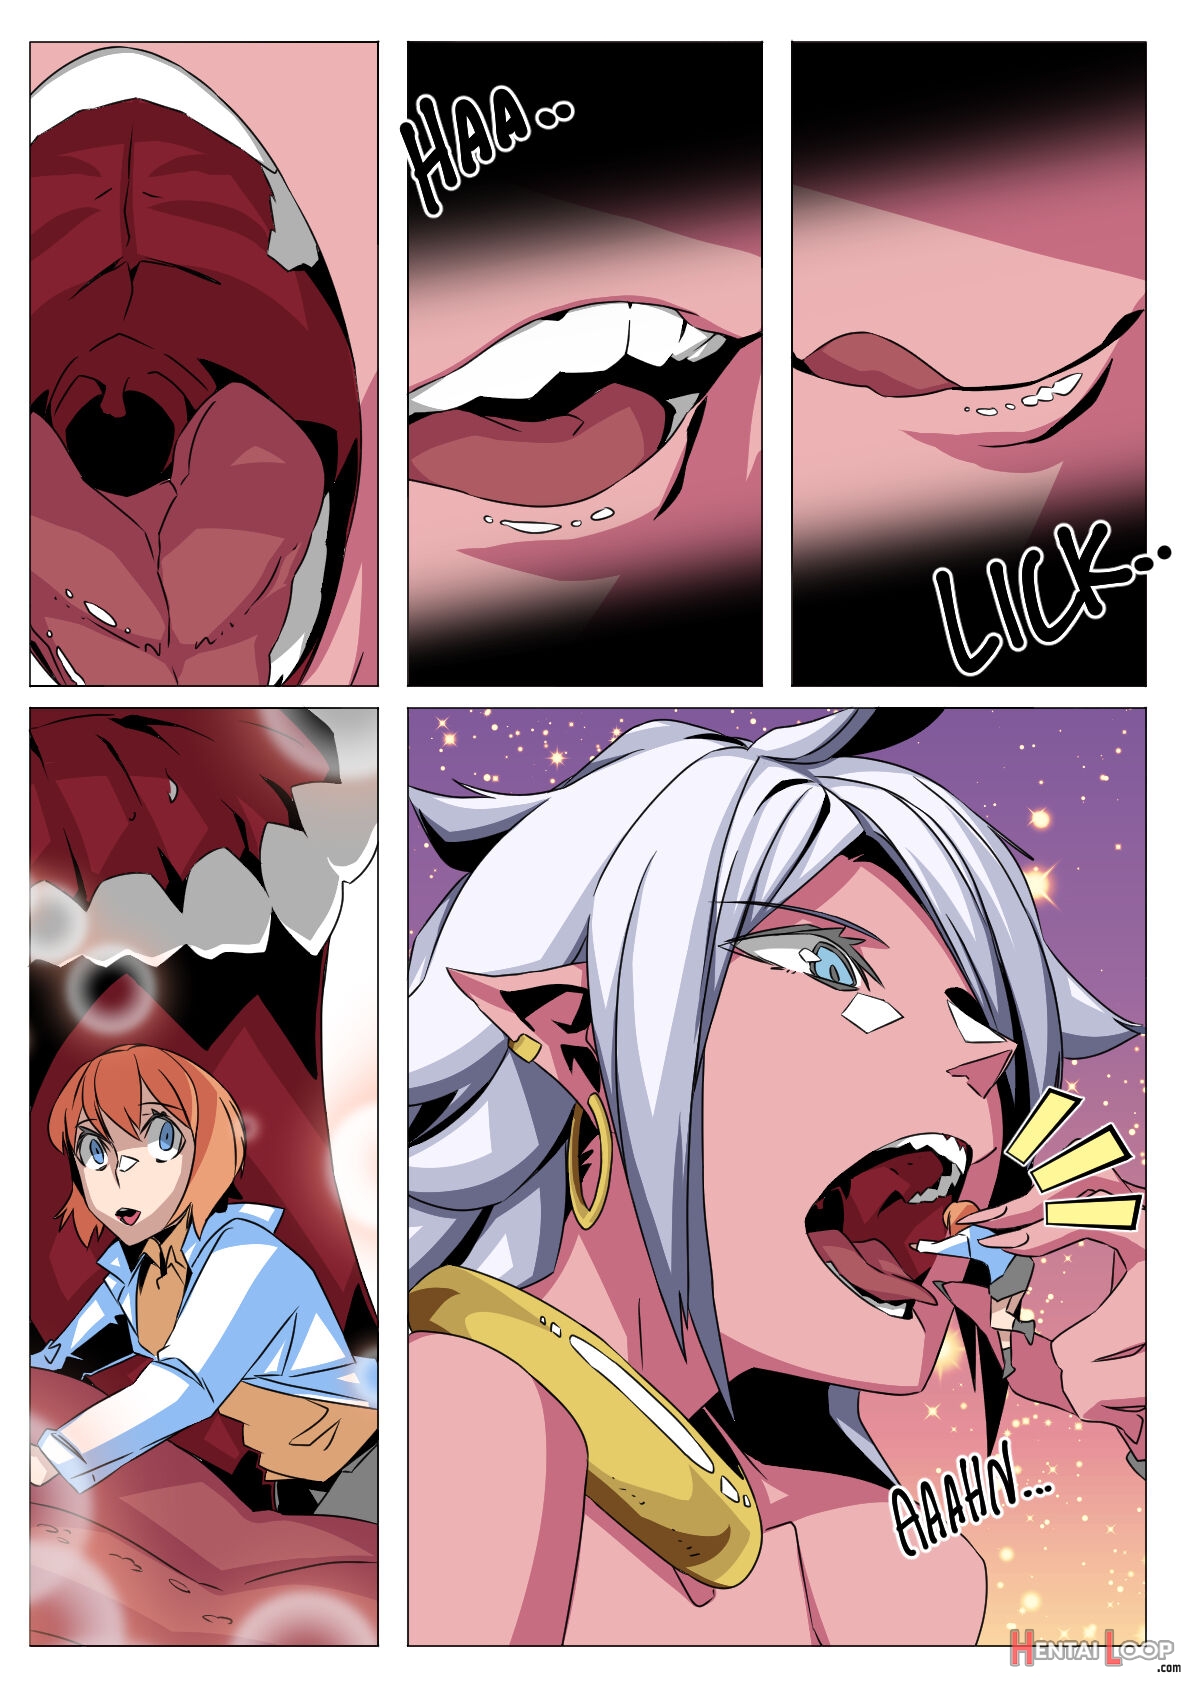 Android 21 Vore page 2